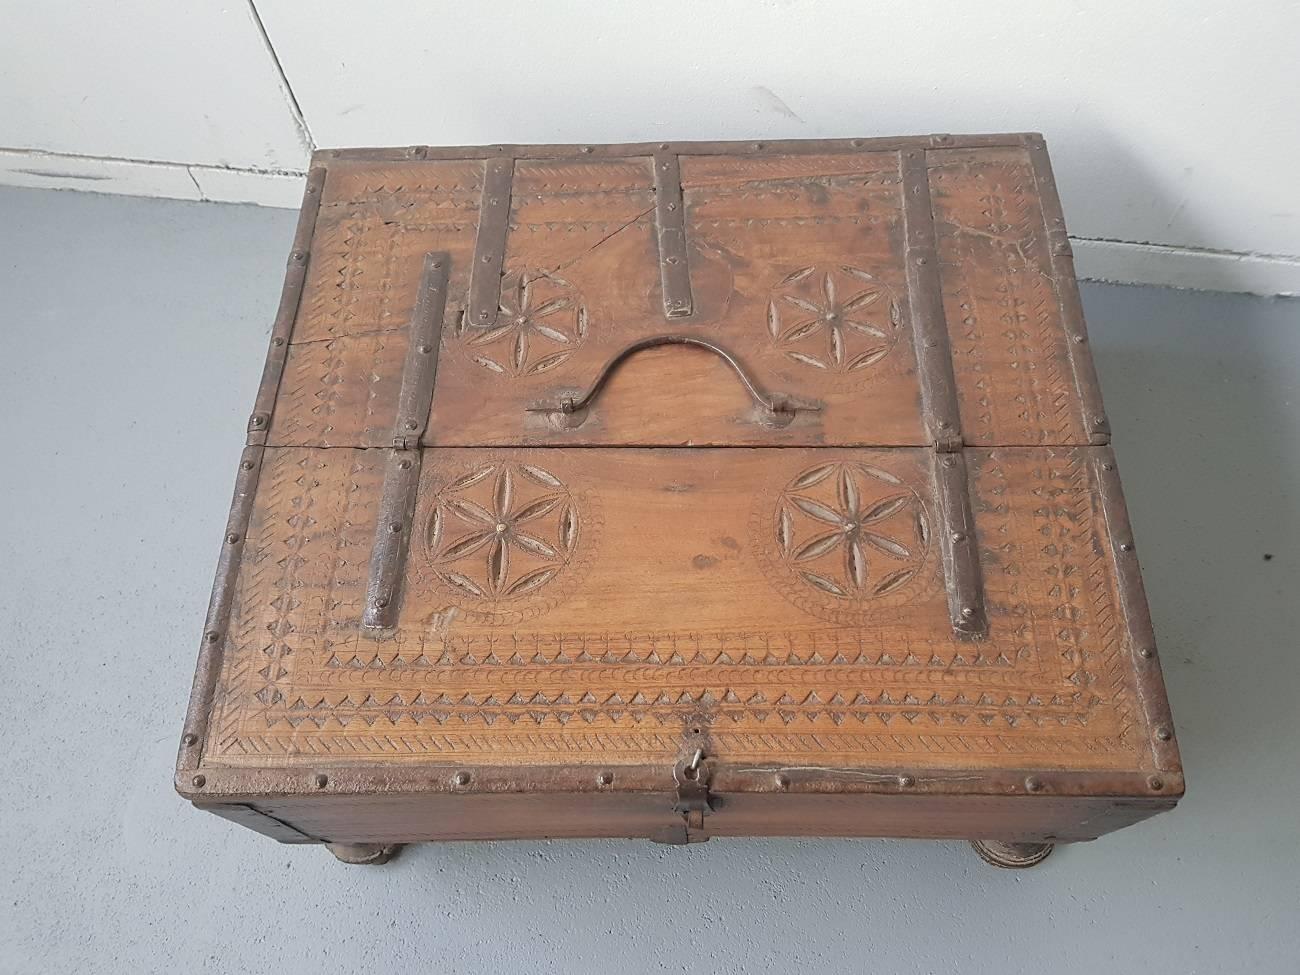 17th-18th century Franco- Flemish spice/salt box, with lift up lid over a rectangular body set on four turned feet, all over wheel carvings, oak body with pine secondary wood, old varnish finish over a dark surface.

The measurements are,
Depth